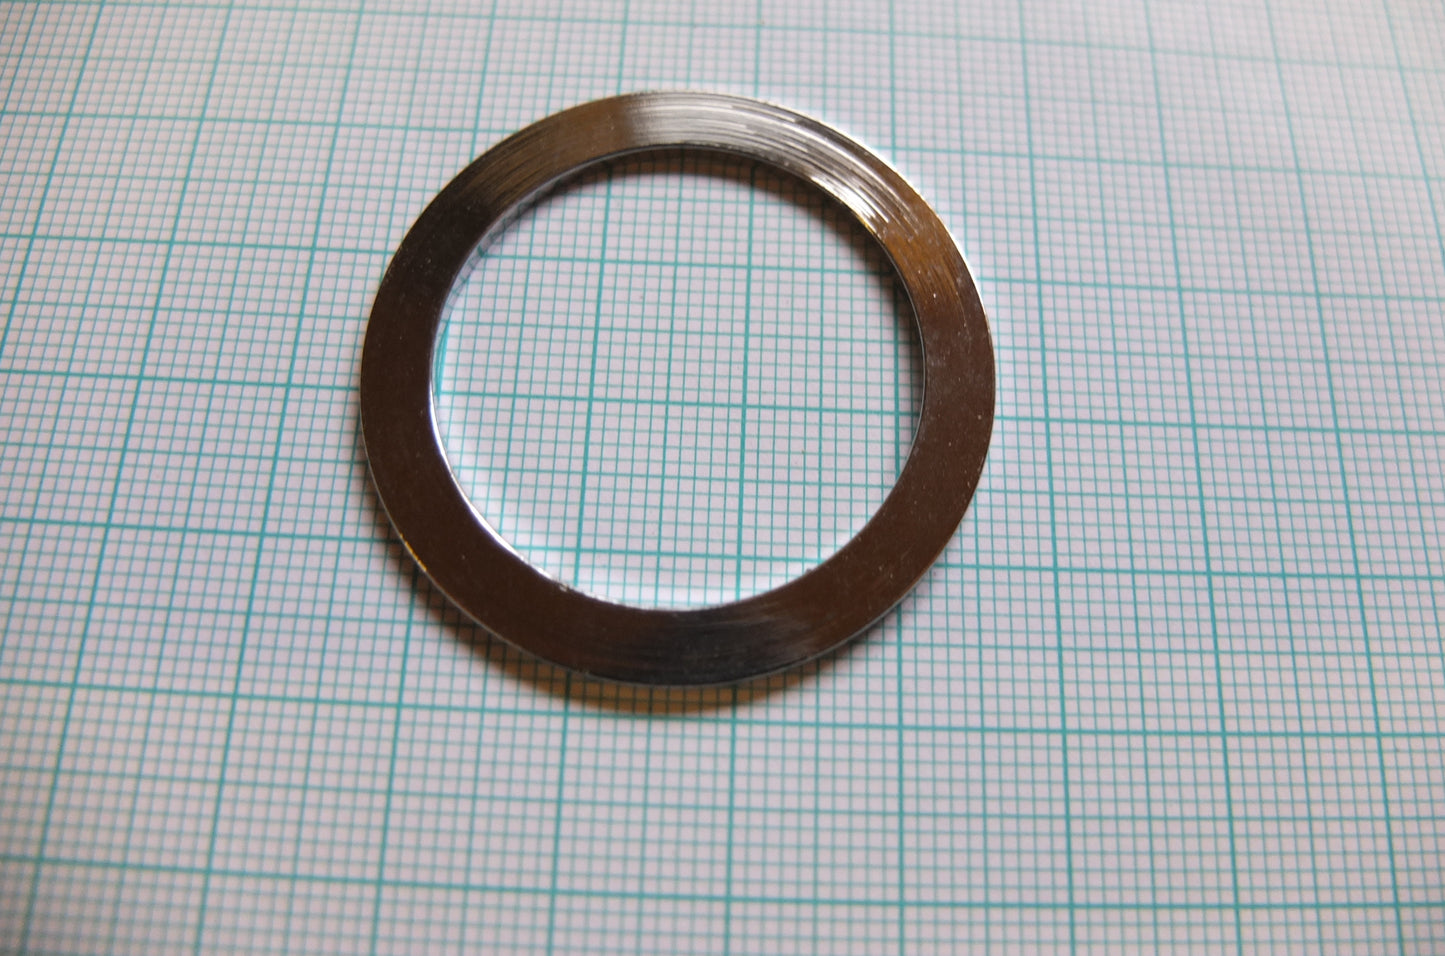 P6/020 S8 Fork Washer